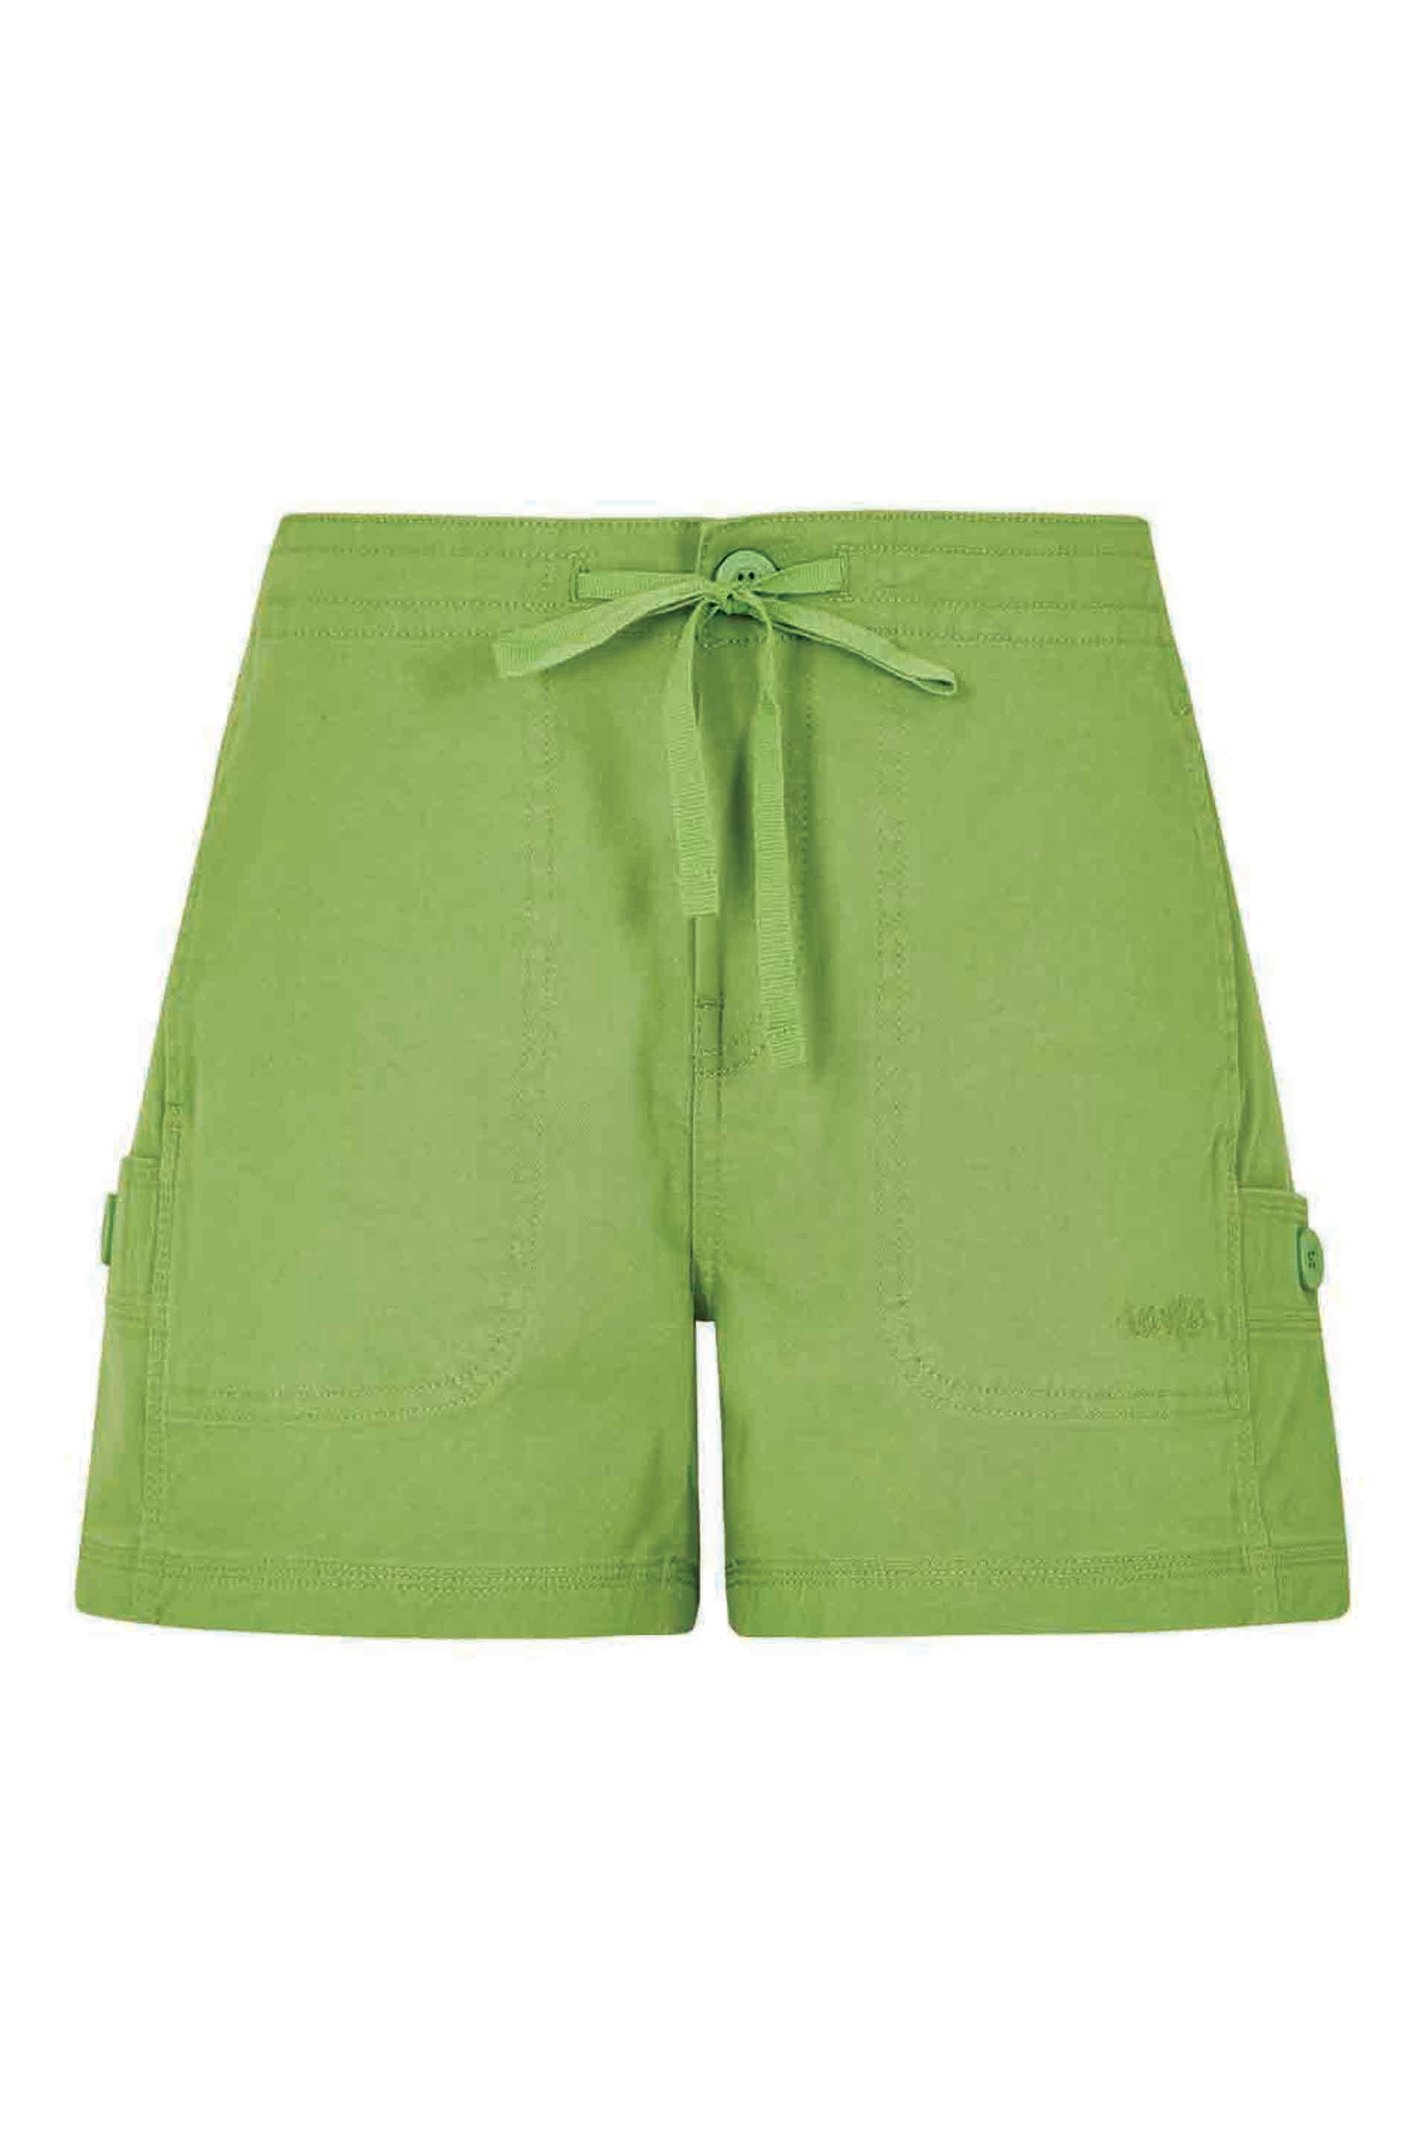 Weird Fish Willoughby Summer Shorts Kiwi Size 12